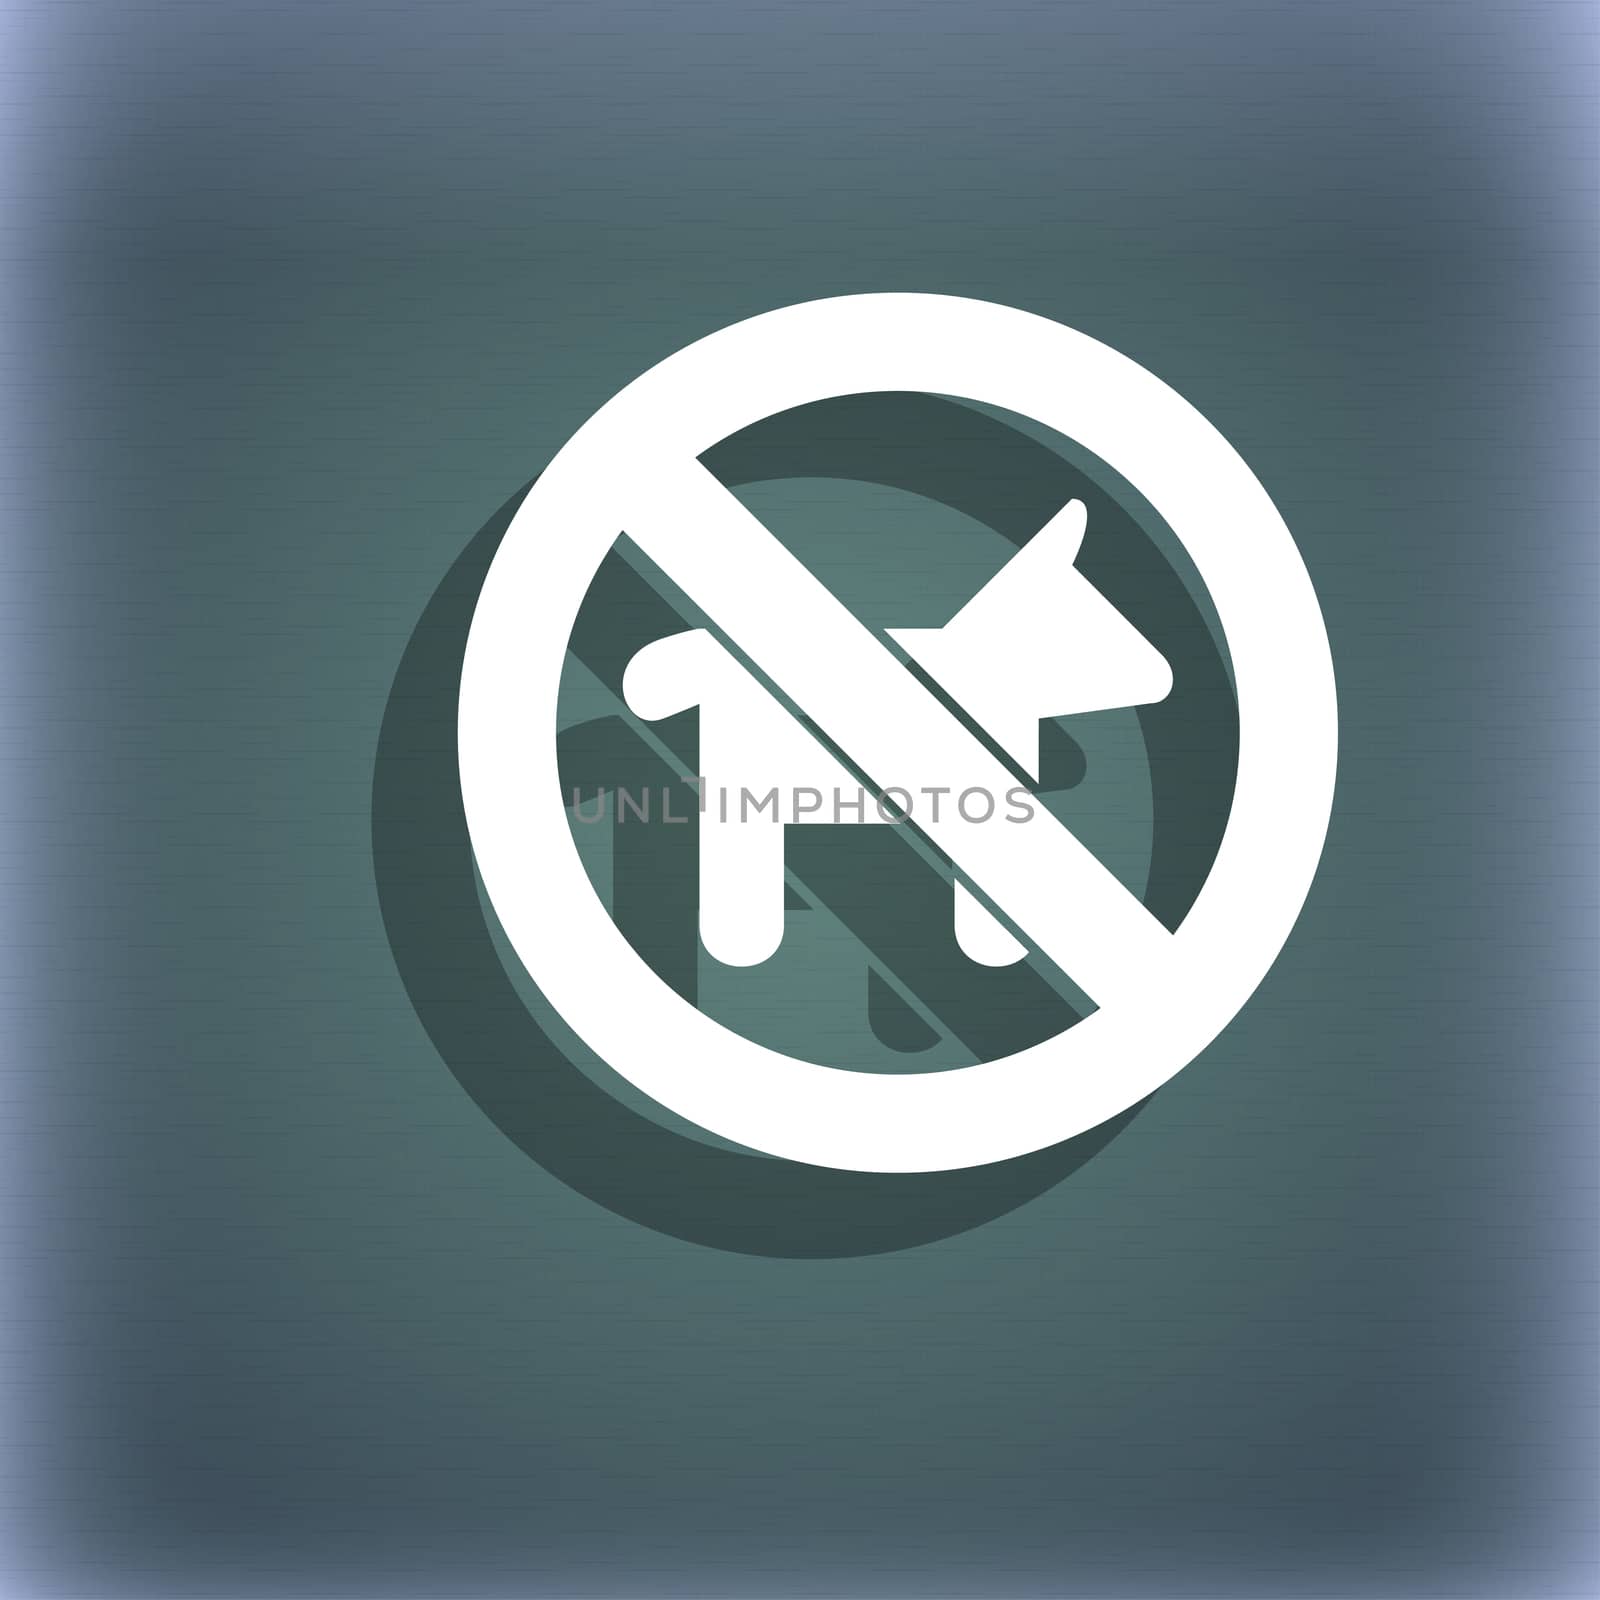 dog walking is prohibited icon symbol on the blue-green abstract background with shadow and space for your text. illustration